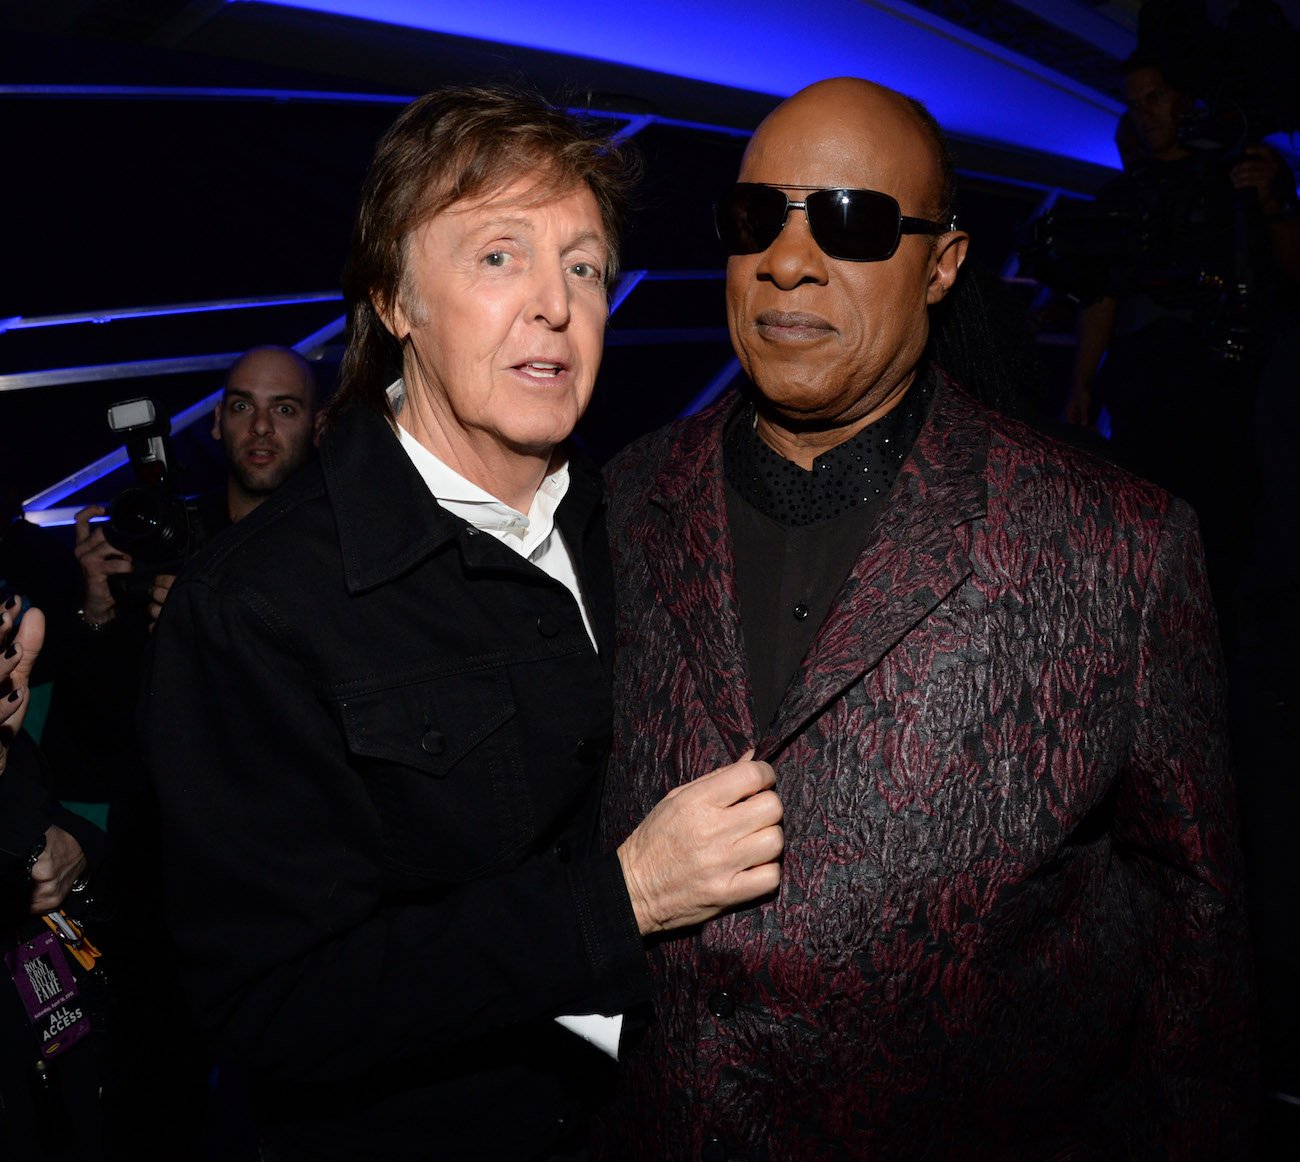 Paul McCartney and Stevie Wonder at the 2015 Rock and Roll Hall of Fame induction ceremony.